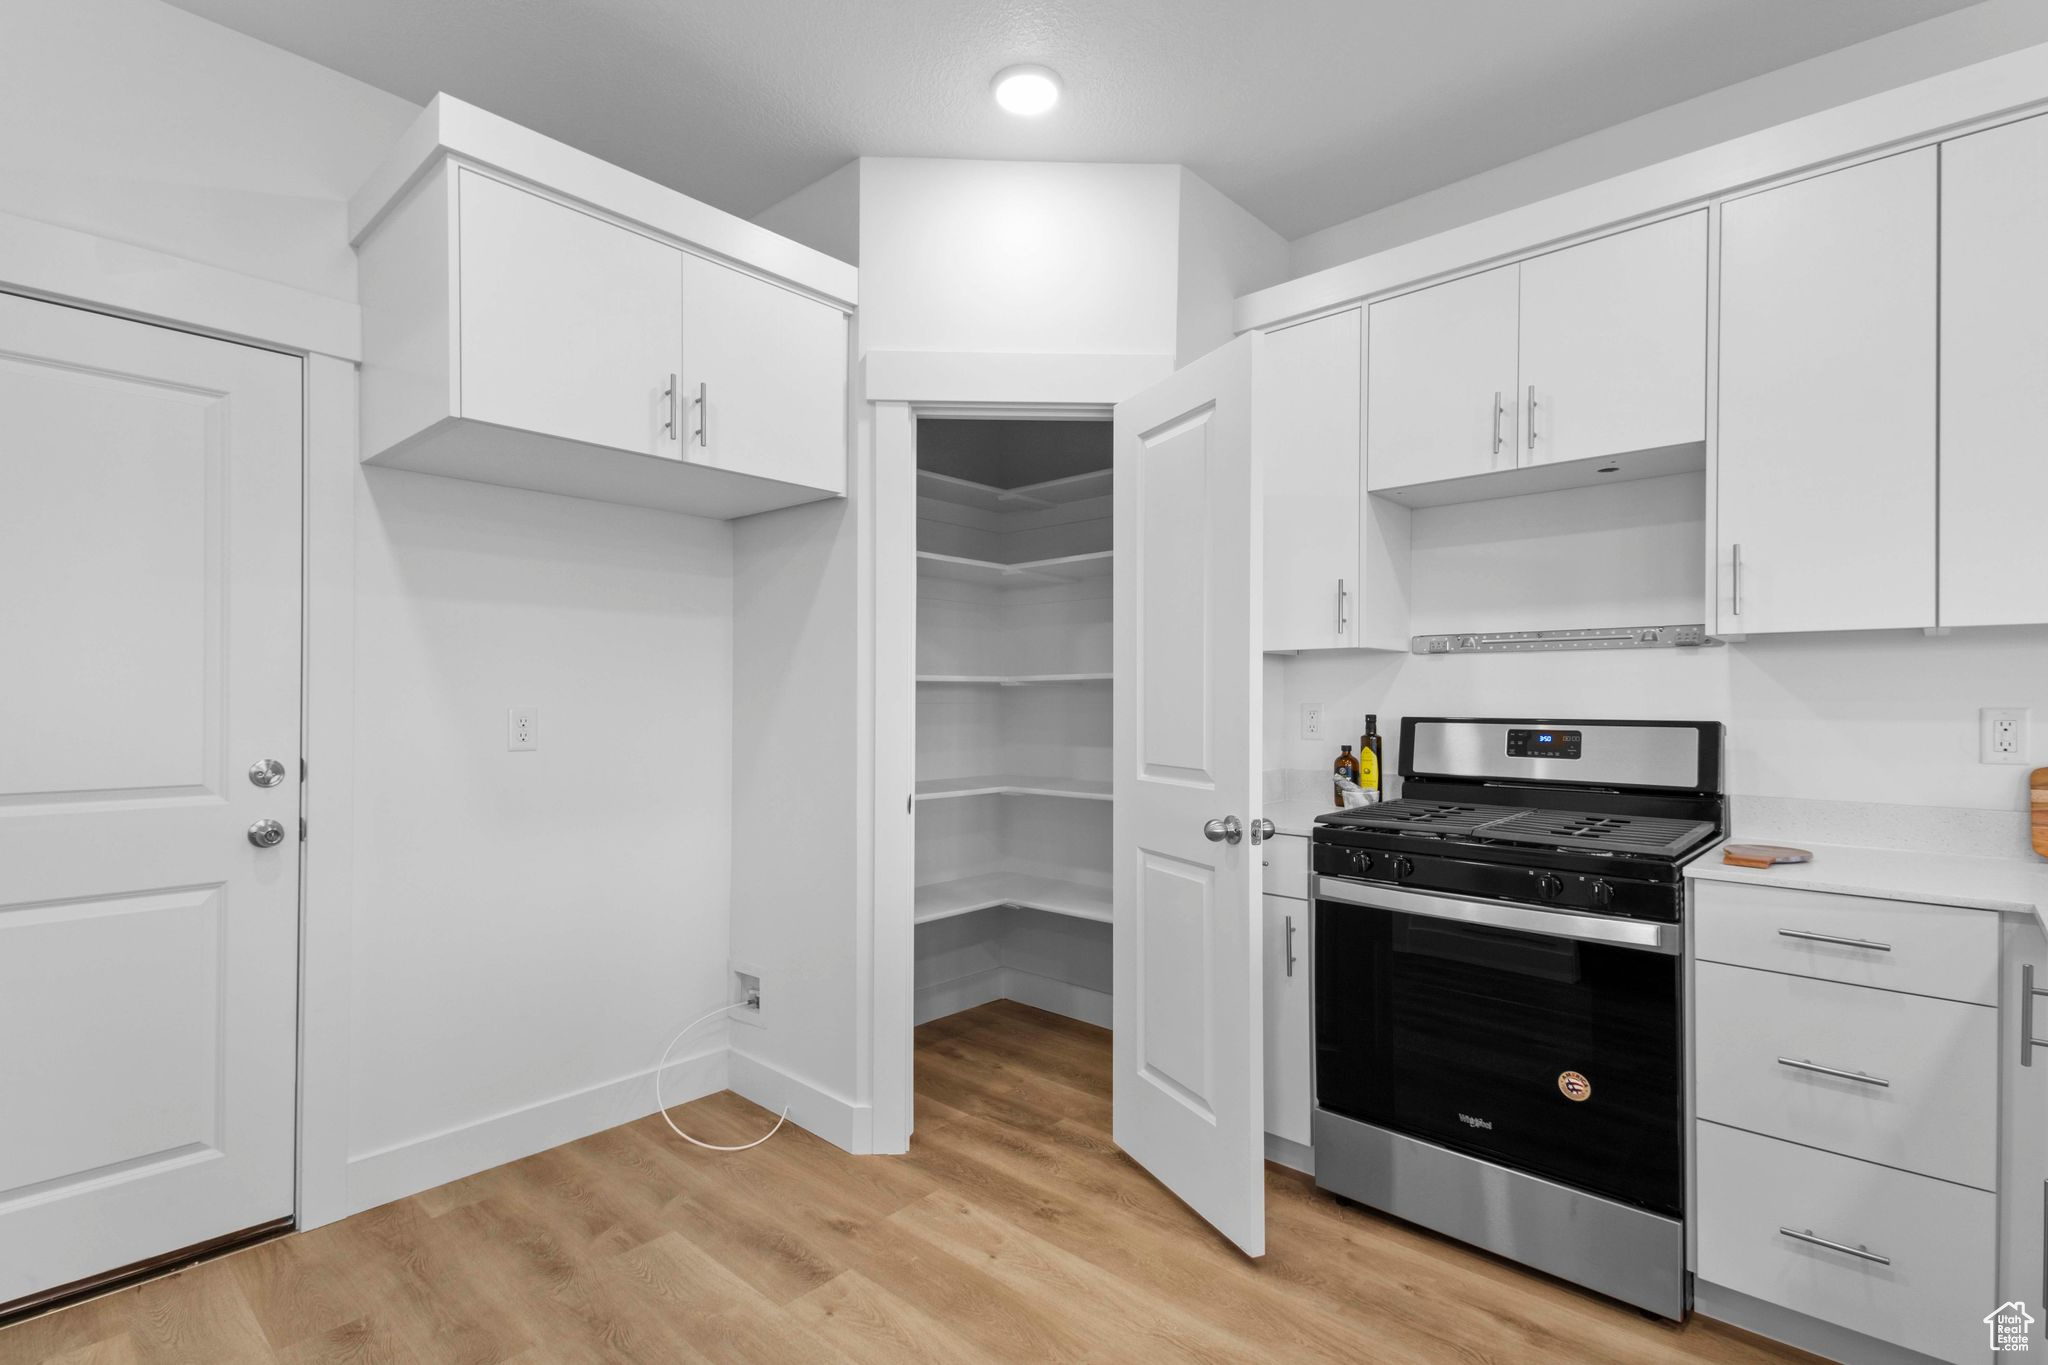 Kitchen with stainless steel range with gas stovetop, white cabinetry, and light wood-type flooring